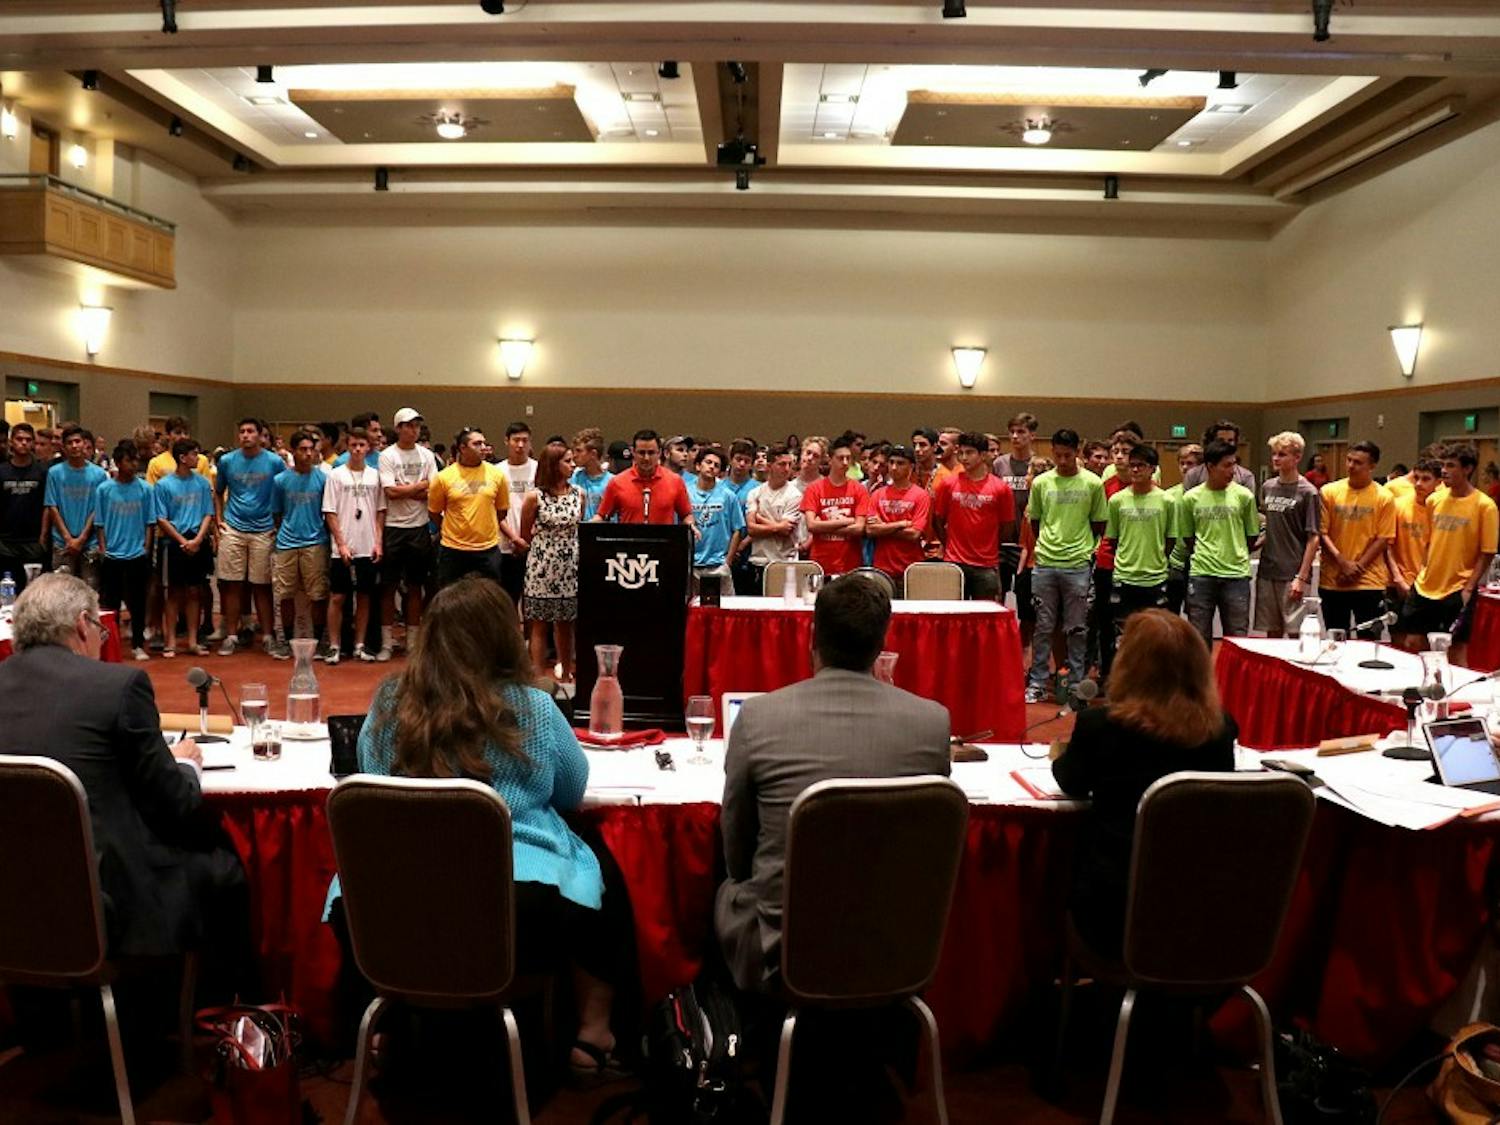 High school soccer players came to protest the announcement that the UNM's men's soccer team was on the chopping block for the Board of Regents on July 19, 2018.